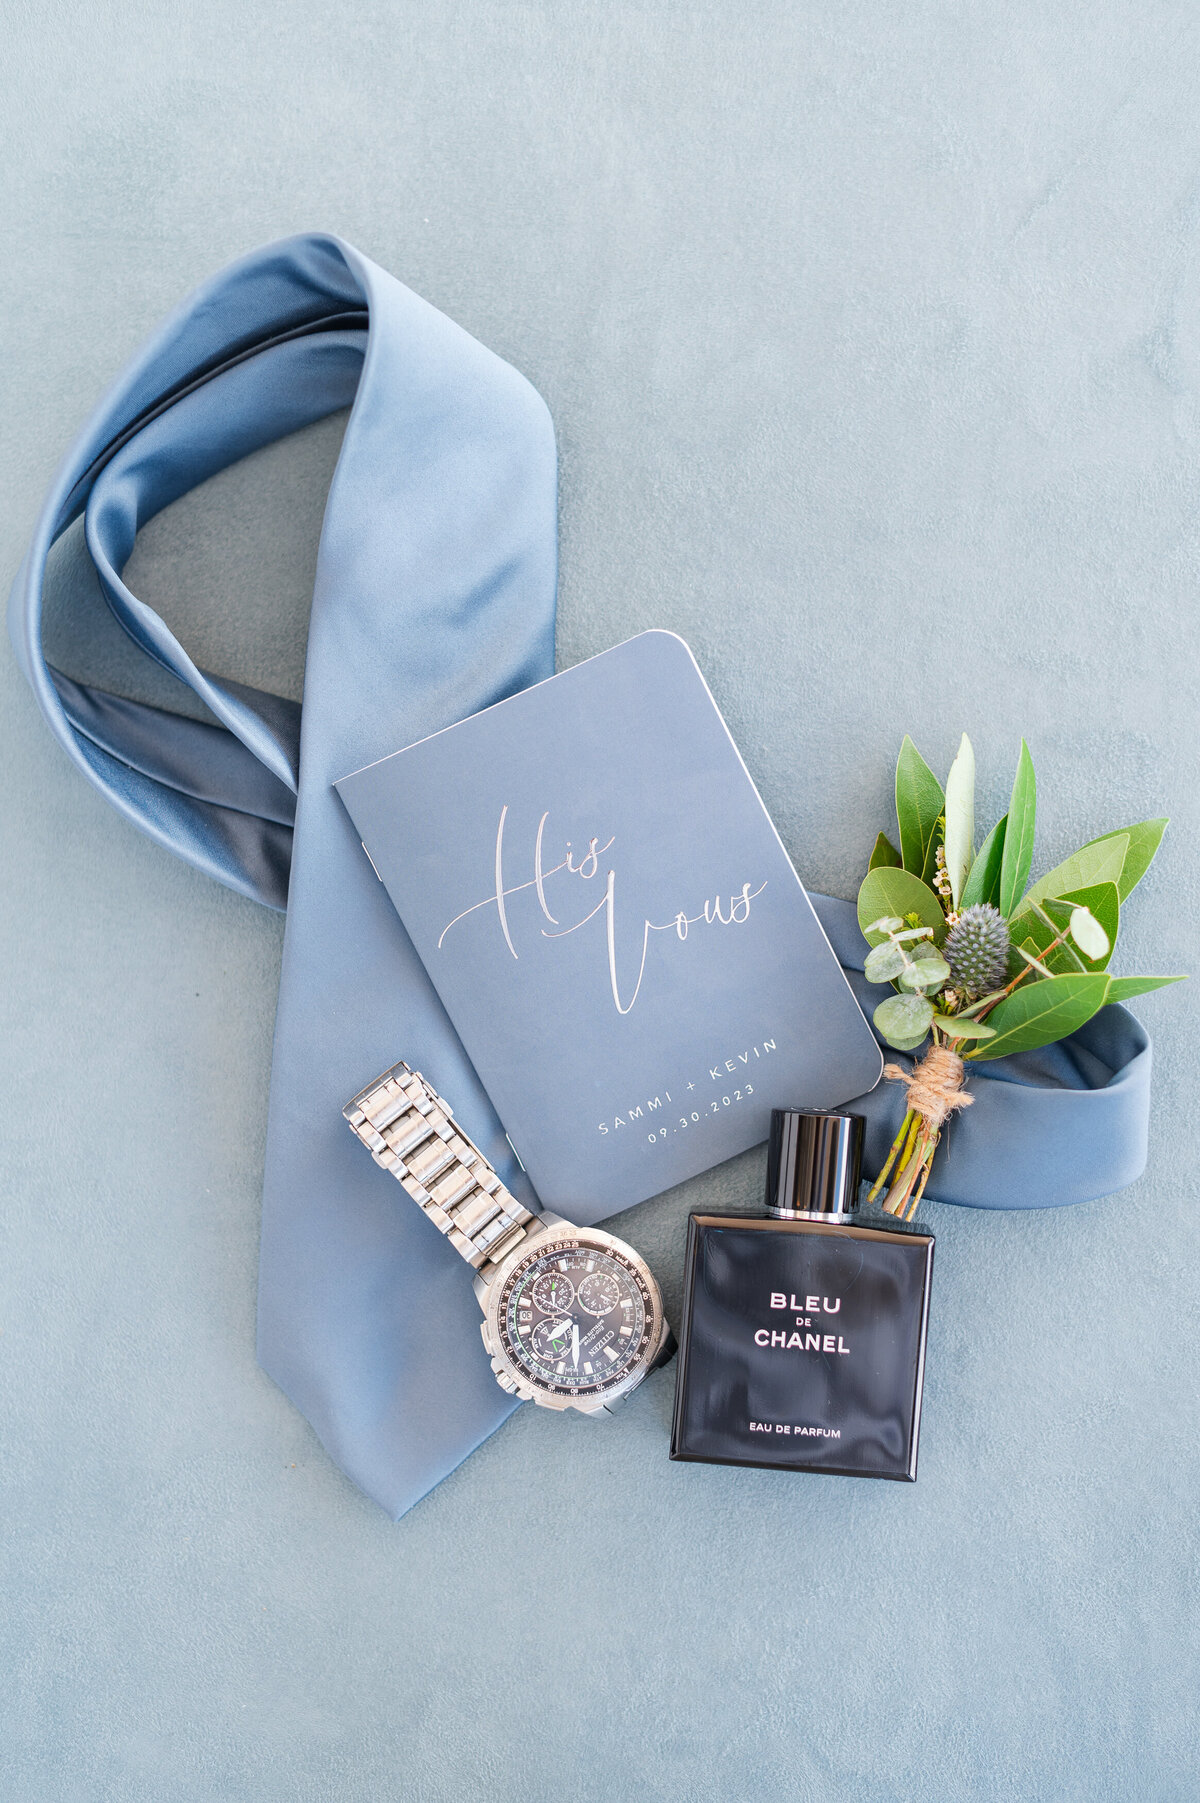 Flat lay of groom's tie, blue vow book, watch, cologne bottle and boutonniere on a blue suede background.